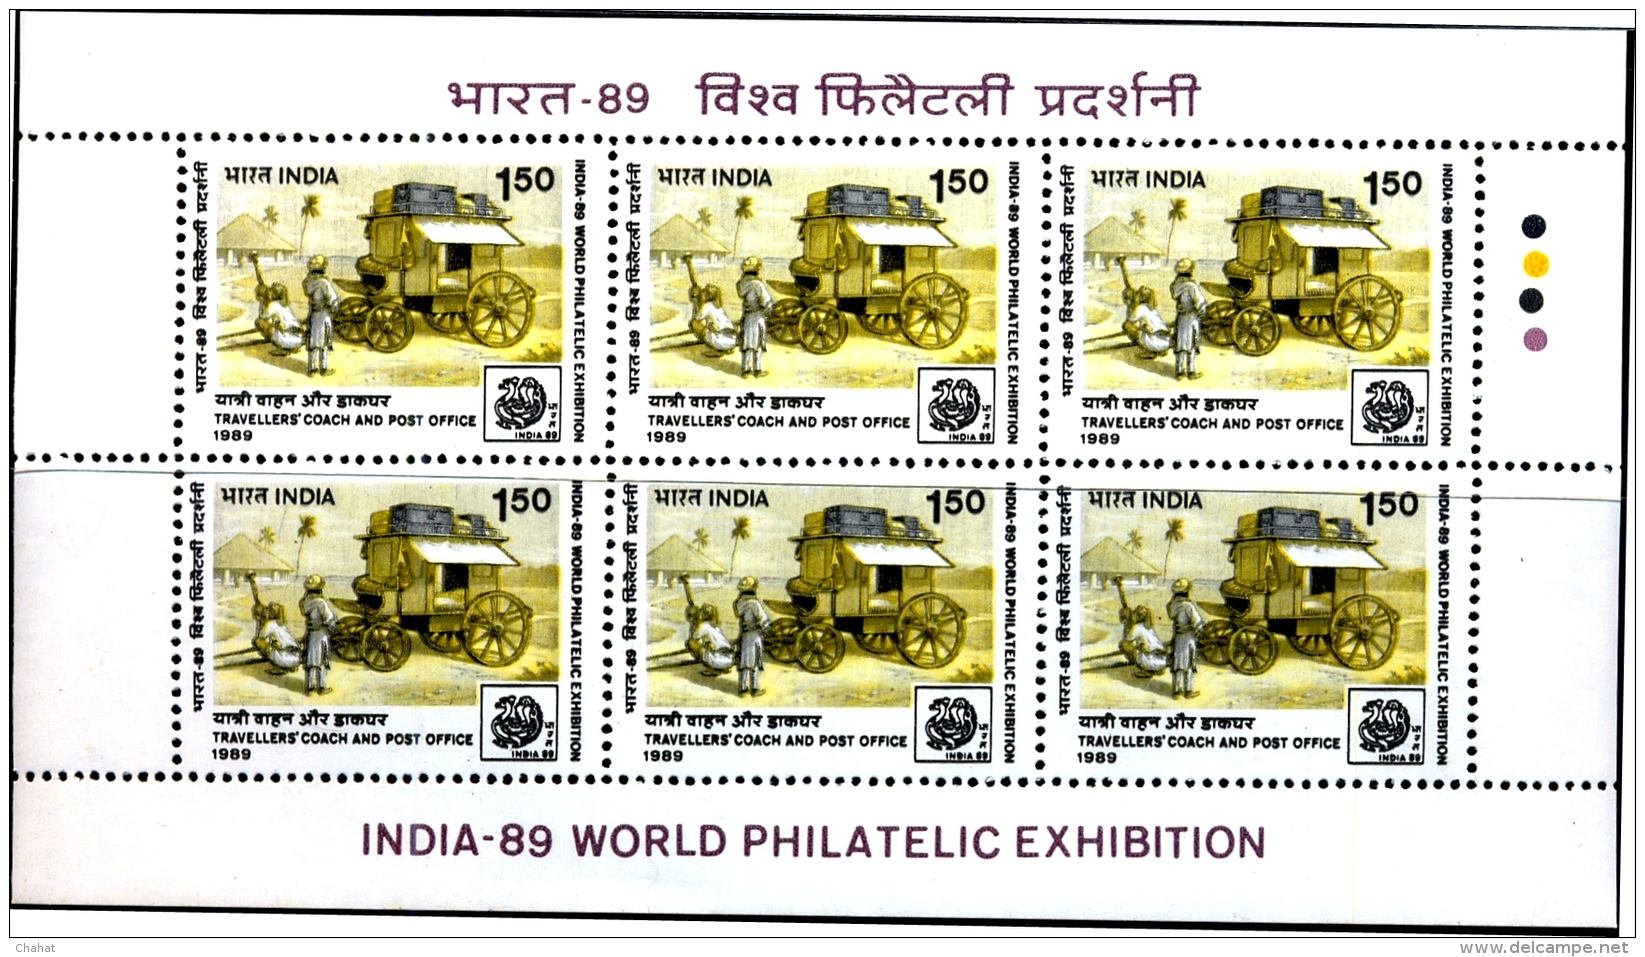 TRAVELLER'S COACH &amp; POST OFFICE-ERROR-INDIA 89-WORLD PHILATELIC EXHIBITION-BOOKLET PANES-EXTREMELY SCARCE-MNH-M-145